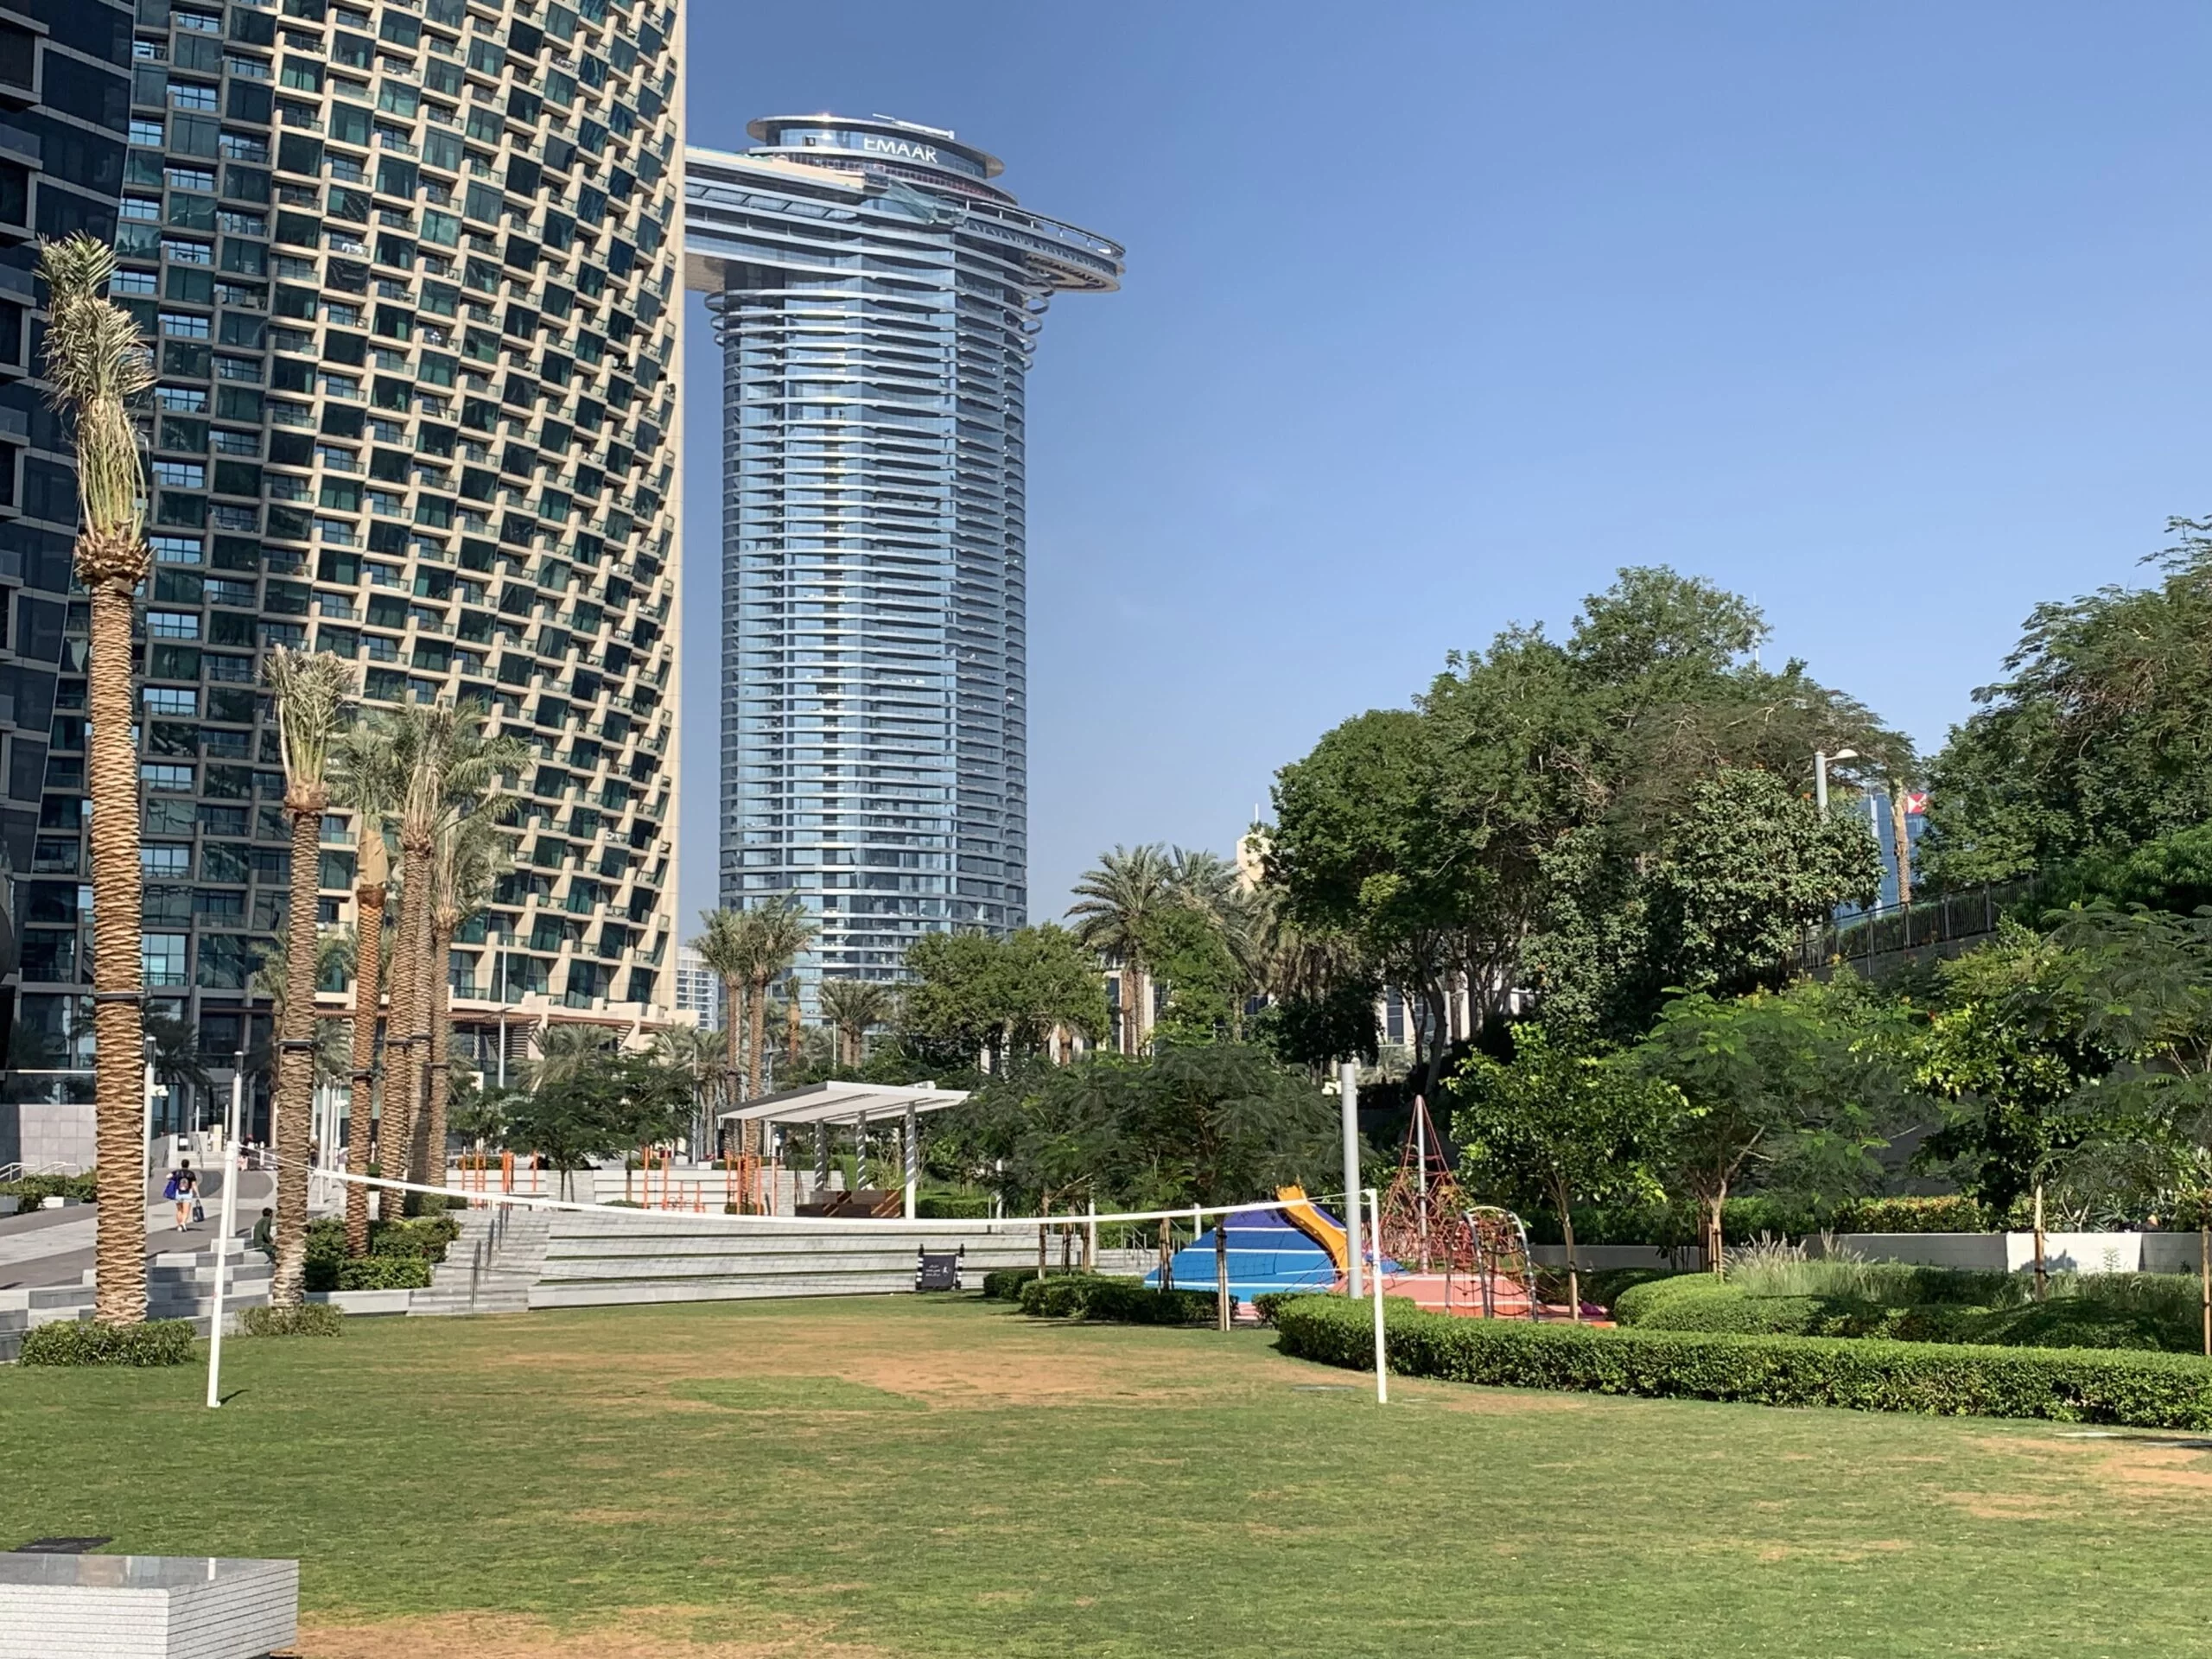 Play area for kids at Burj Park